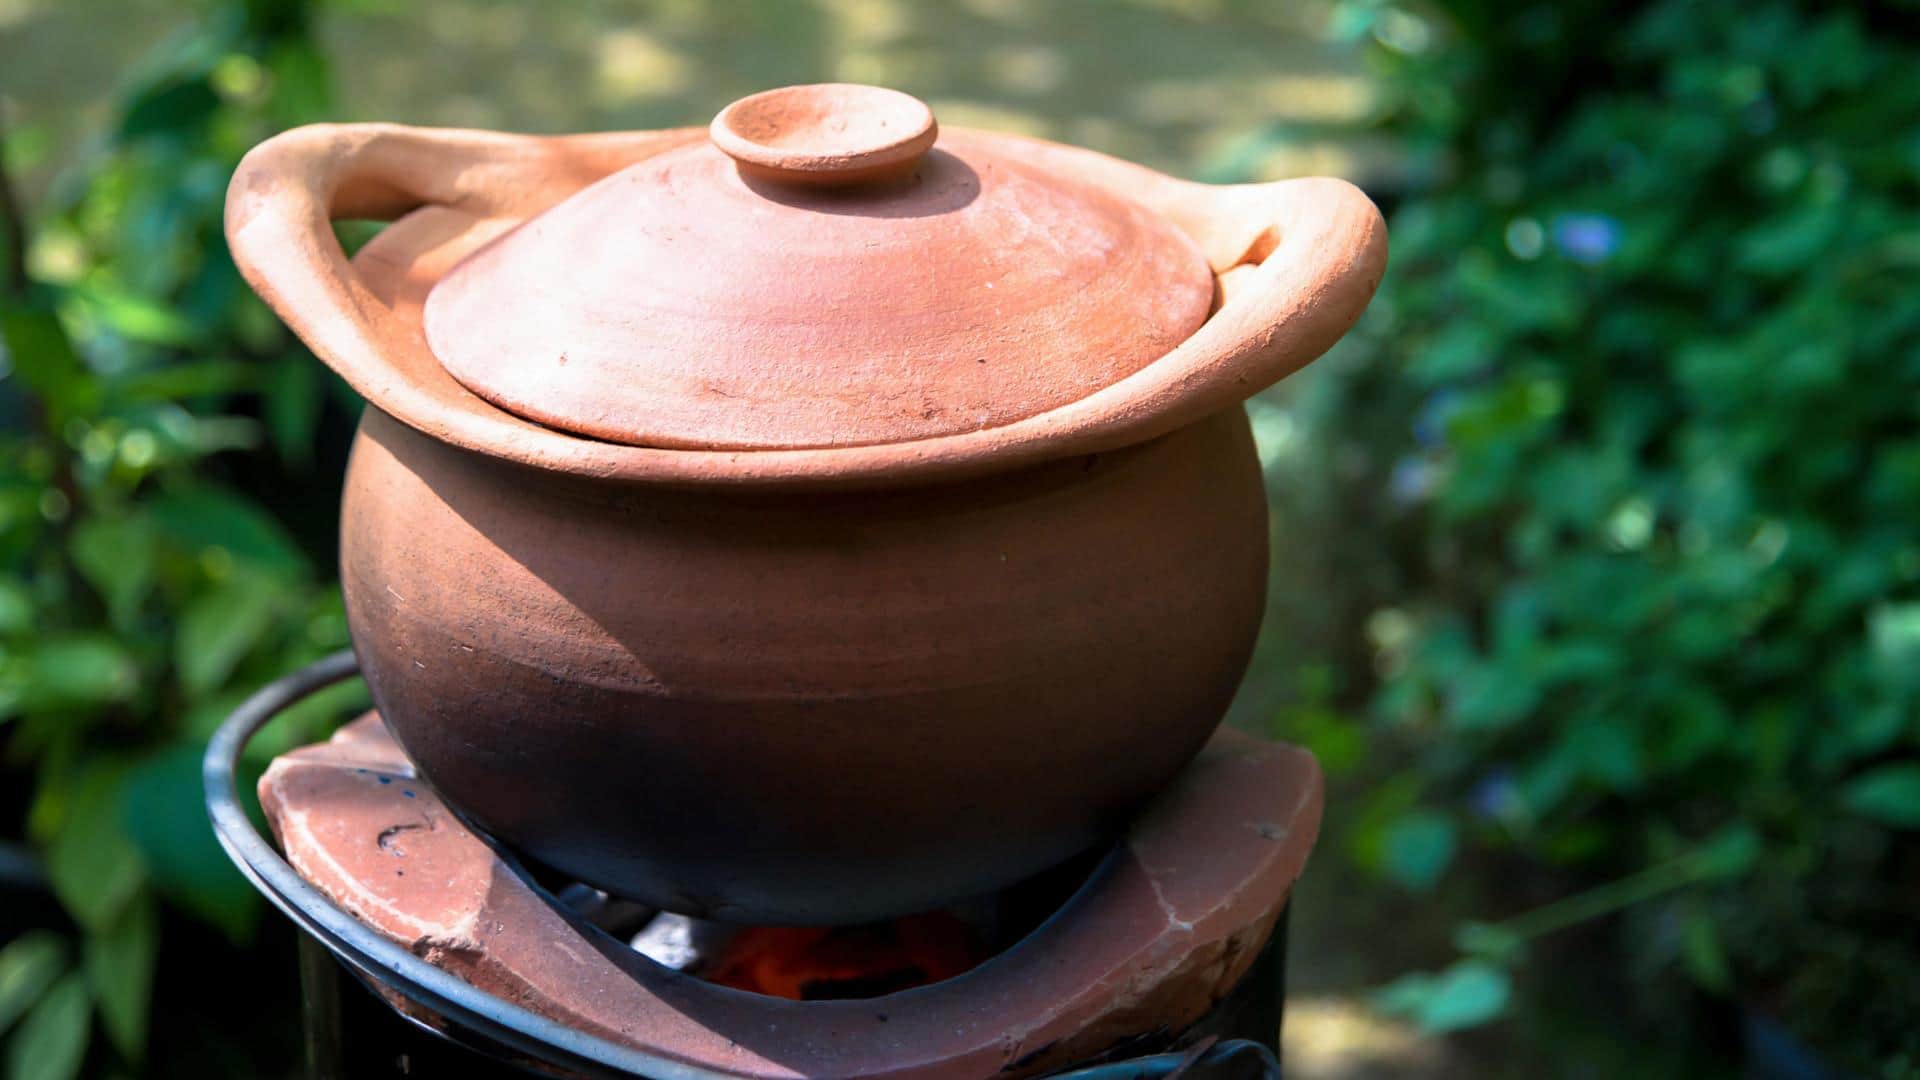 Cooking with clay pots is highly beneficial: Here's how